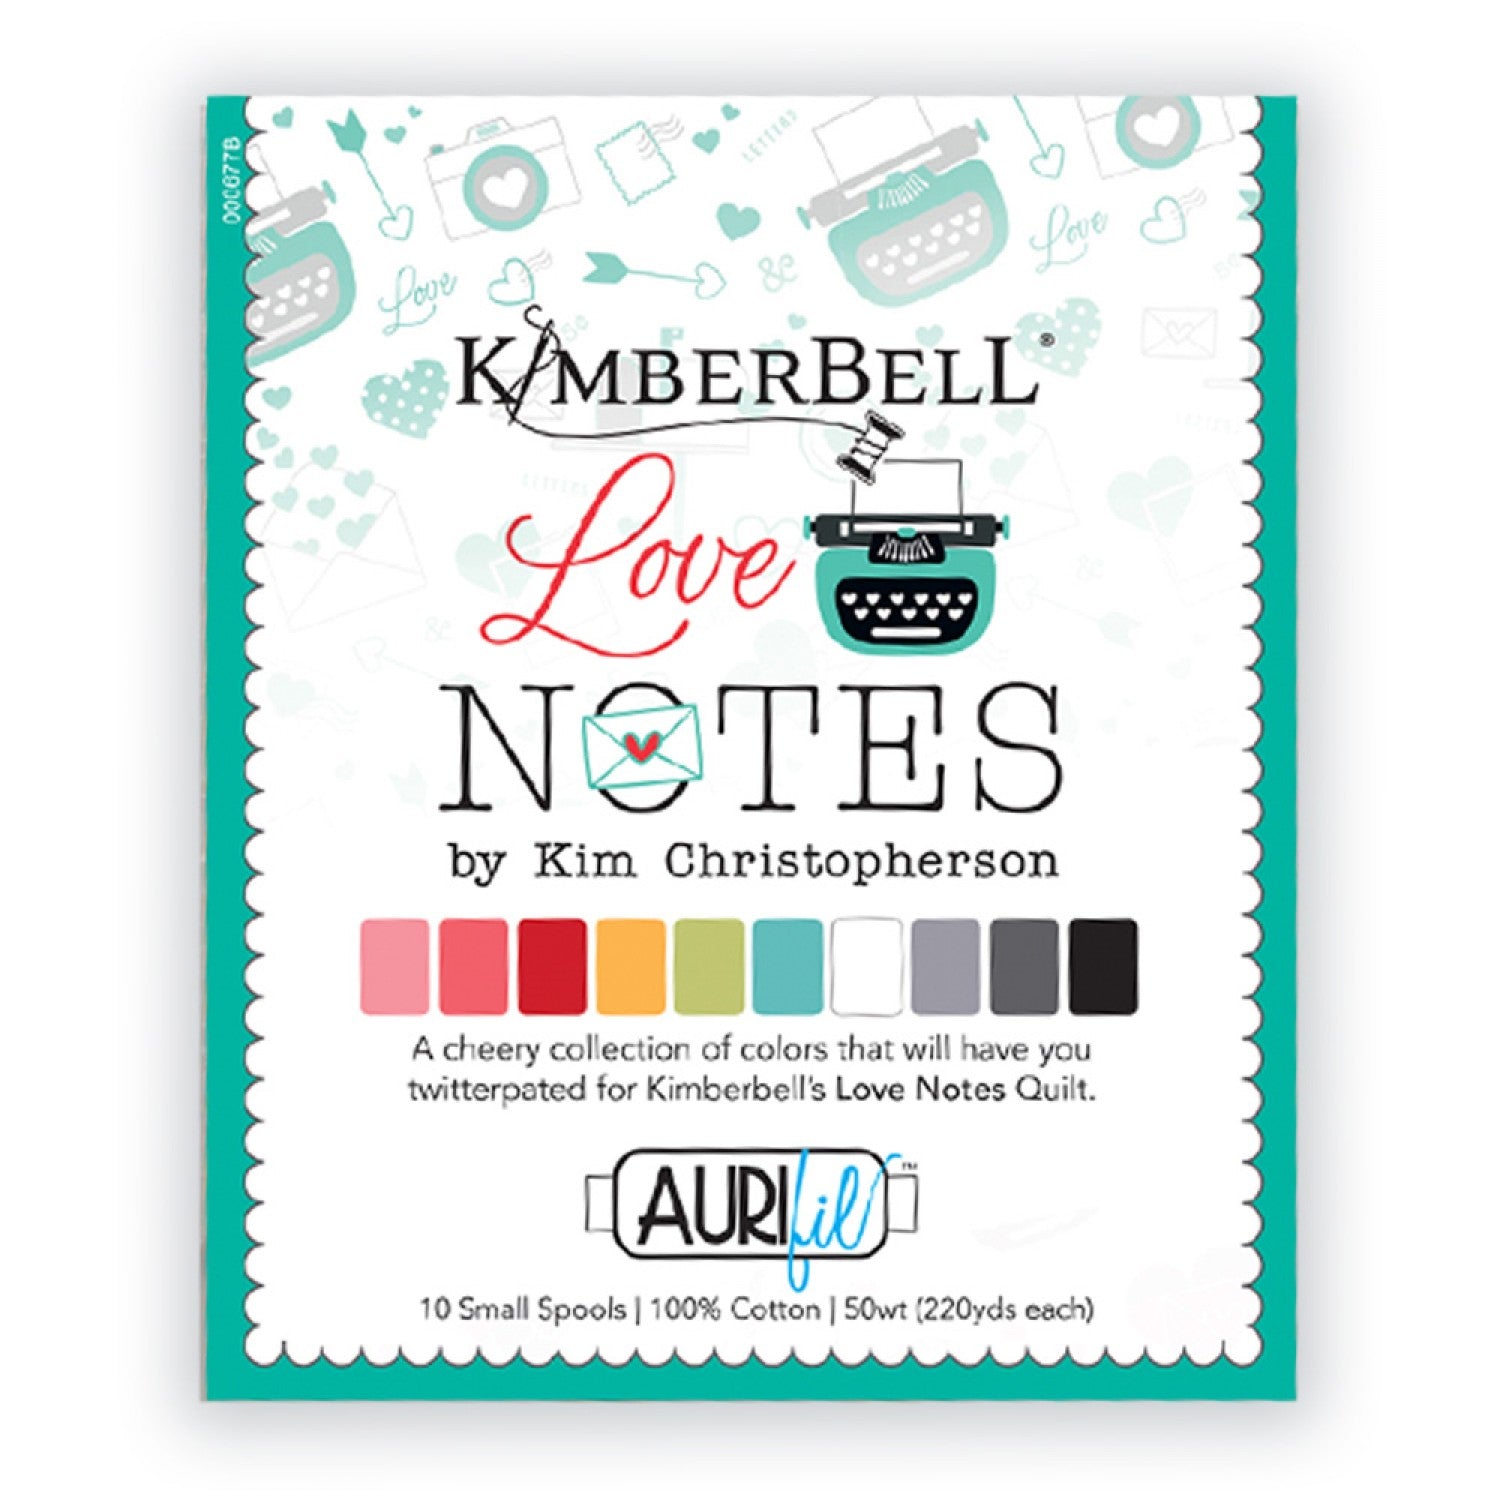 Aurifil Collection coordinates with Kimberbell Love Notes sewing pattern. Includes 10 small spools of colors 2425, 2530, 2250, 2130, 1231, 1148, 2024, 2606, 2630, 2692.